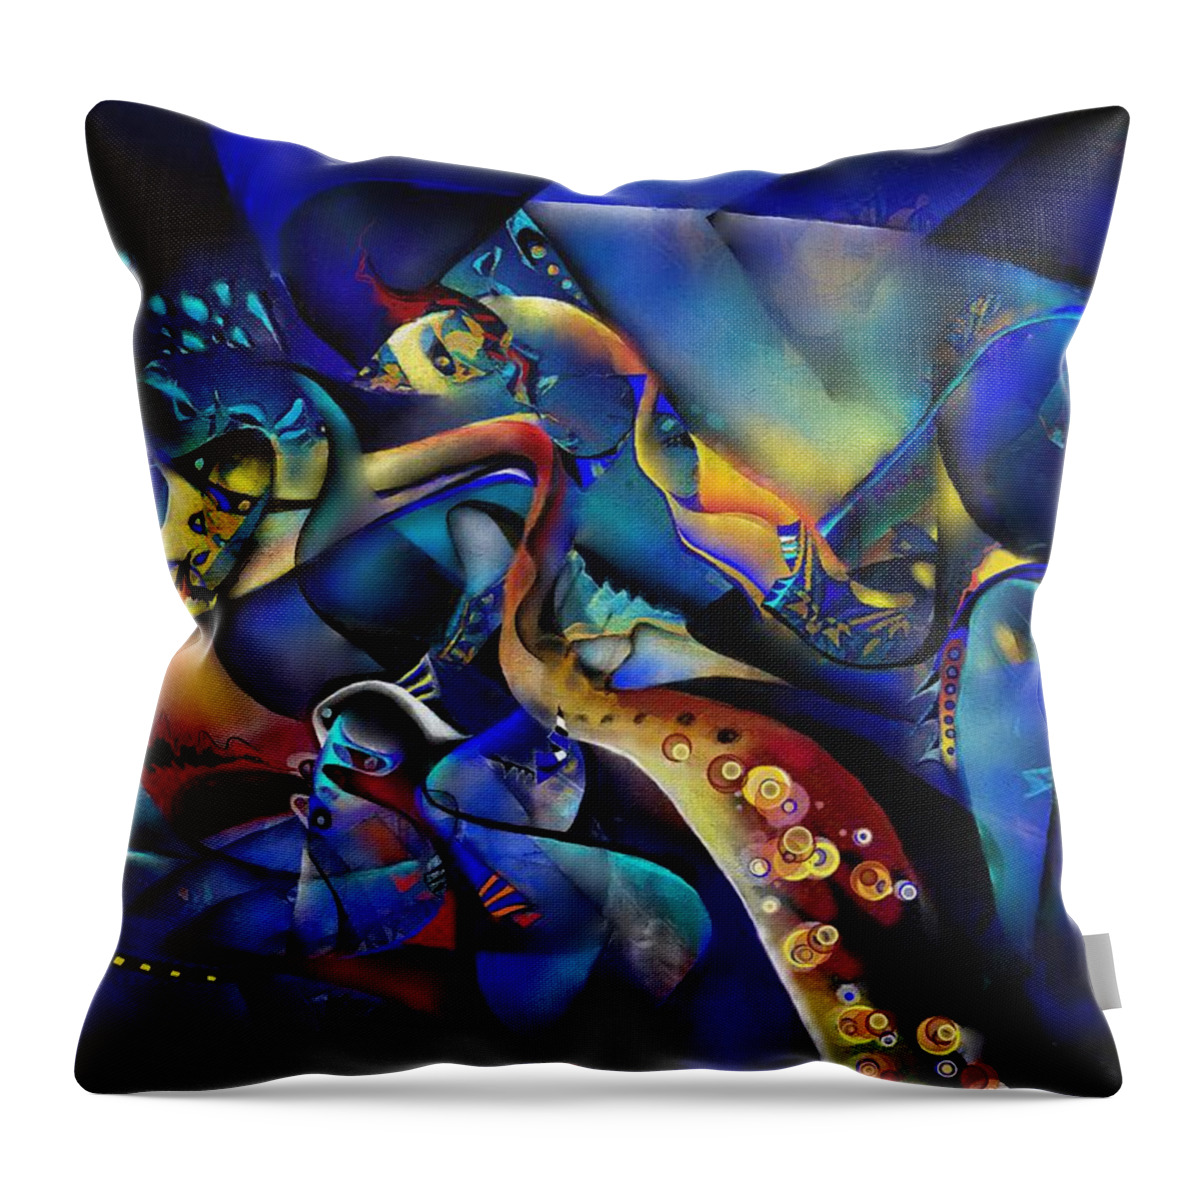 Jazz Throw Pillow featuring the painting Jazz by Wolfgang Schweizer